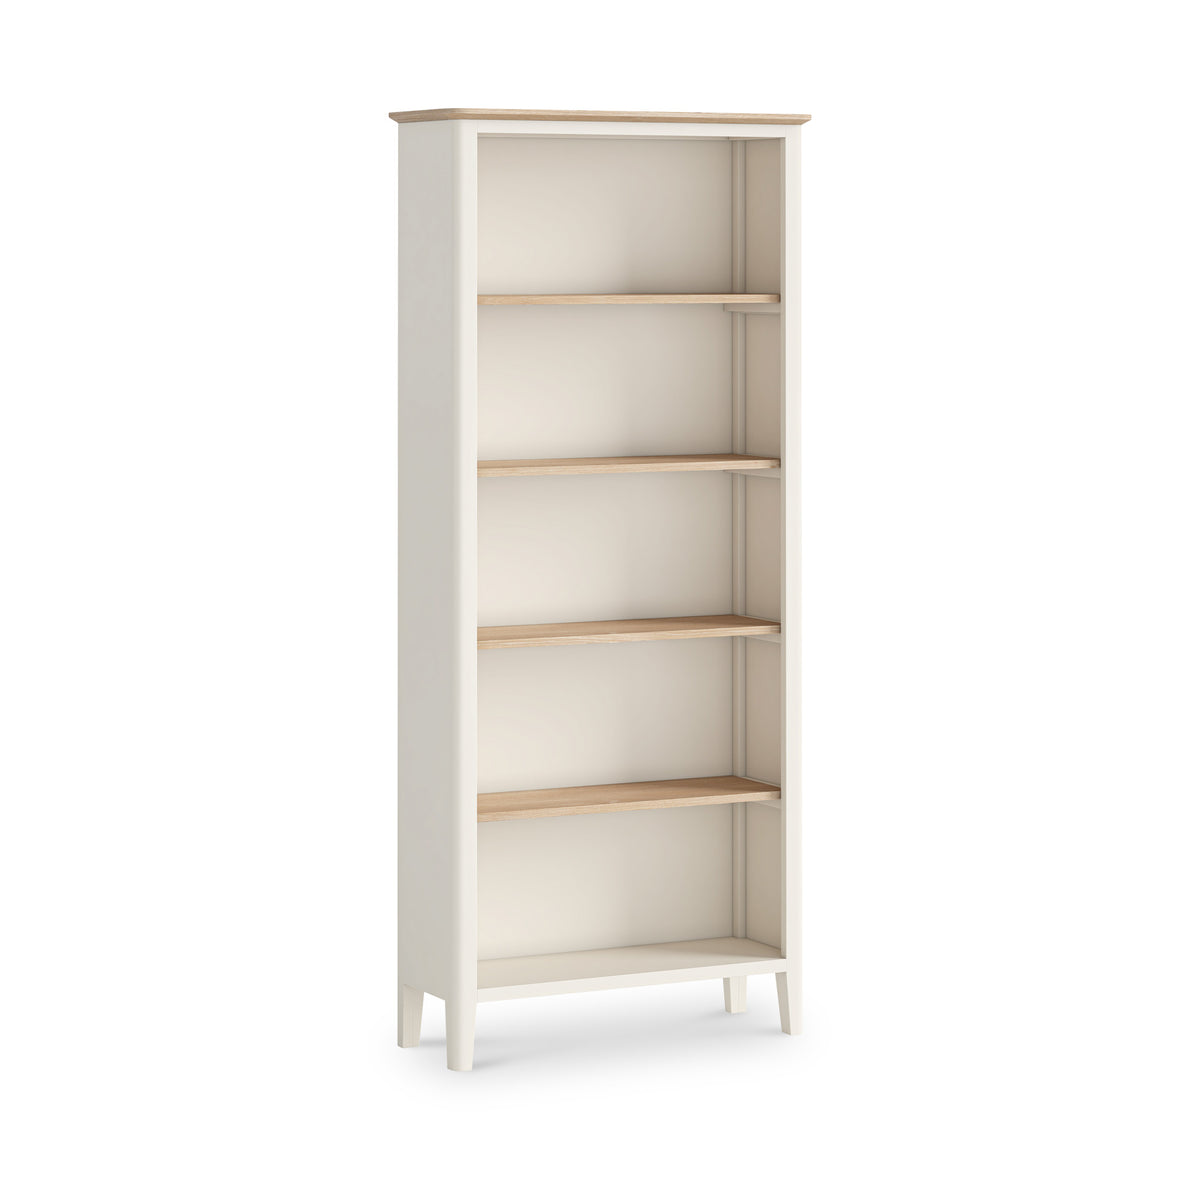 Penrose Coconut White Large Bookcase from Roseland Furniture